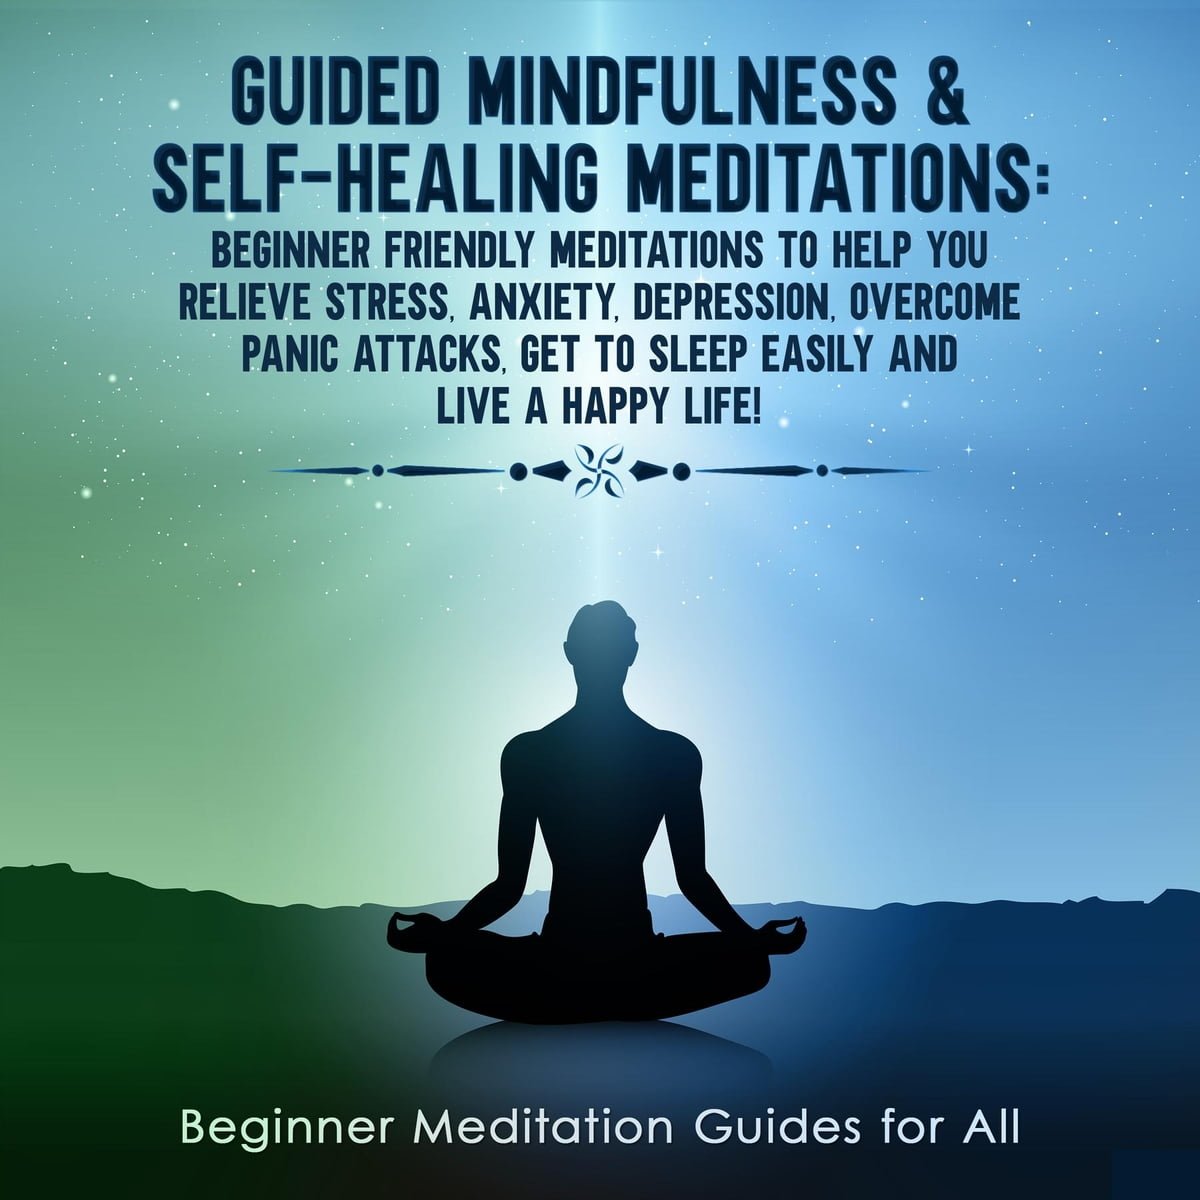 Guided Mindfulness & Self-Healing Meditations: Beginner Friendly Meditations to Help You Relieve Stress, Anxiety, Depression, Overcome Panic Attacks, Get to Sleep Easily and Live a Happy Life!